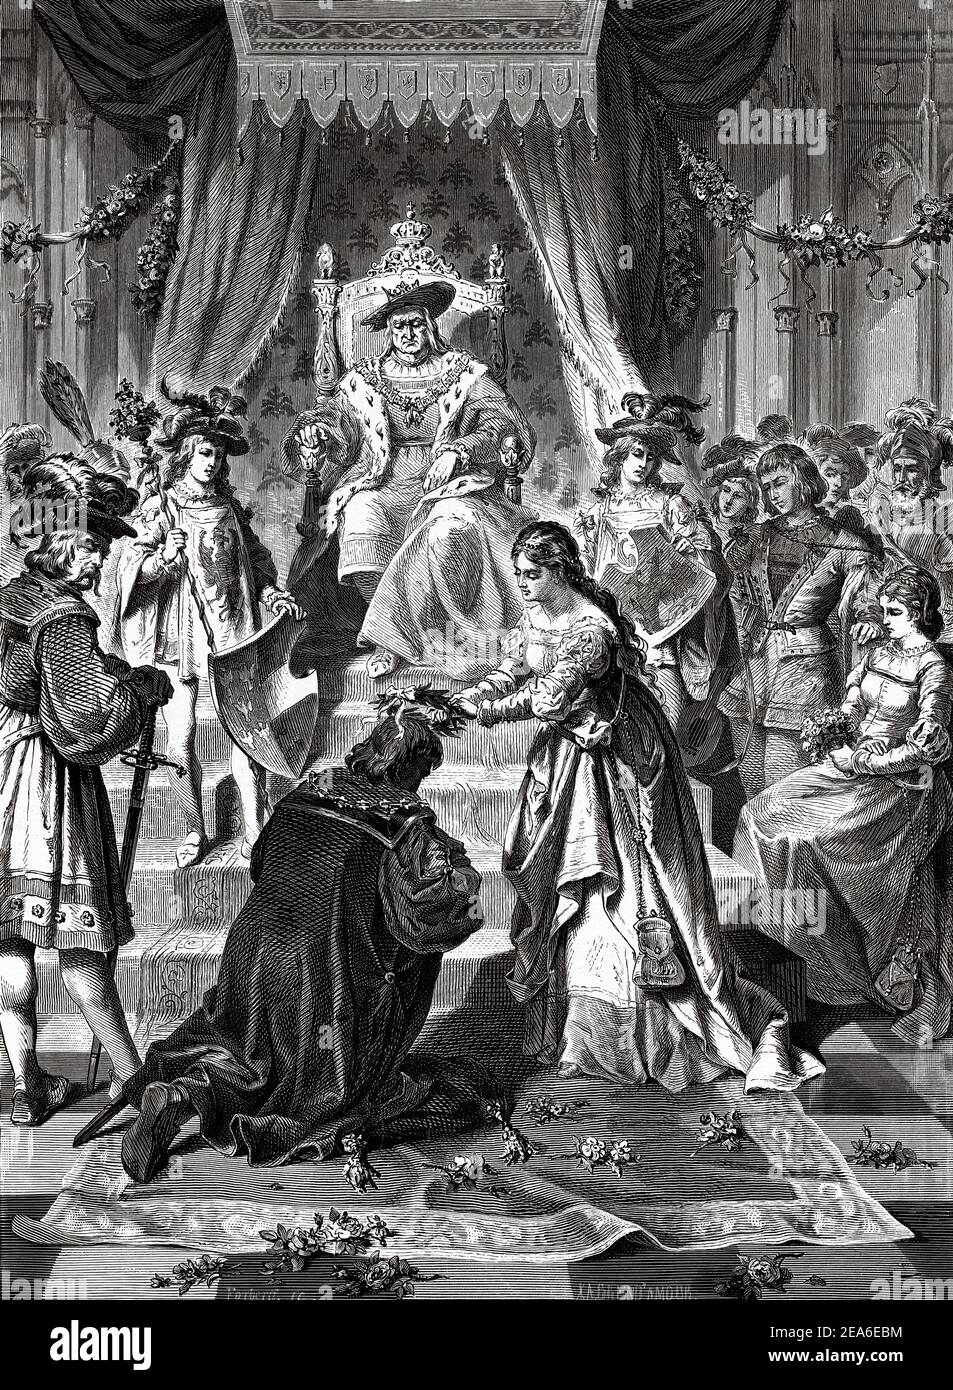 The coronation of Ulrich von Hutten. Ulrich von Hutten being crowned Poet Laureate by the Holy Roman Emperor Maximilian I, 1517. Europe. Old 19th century engraved illustration from El Mundo Ilustrado 1879 Stock Photo